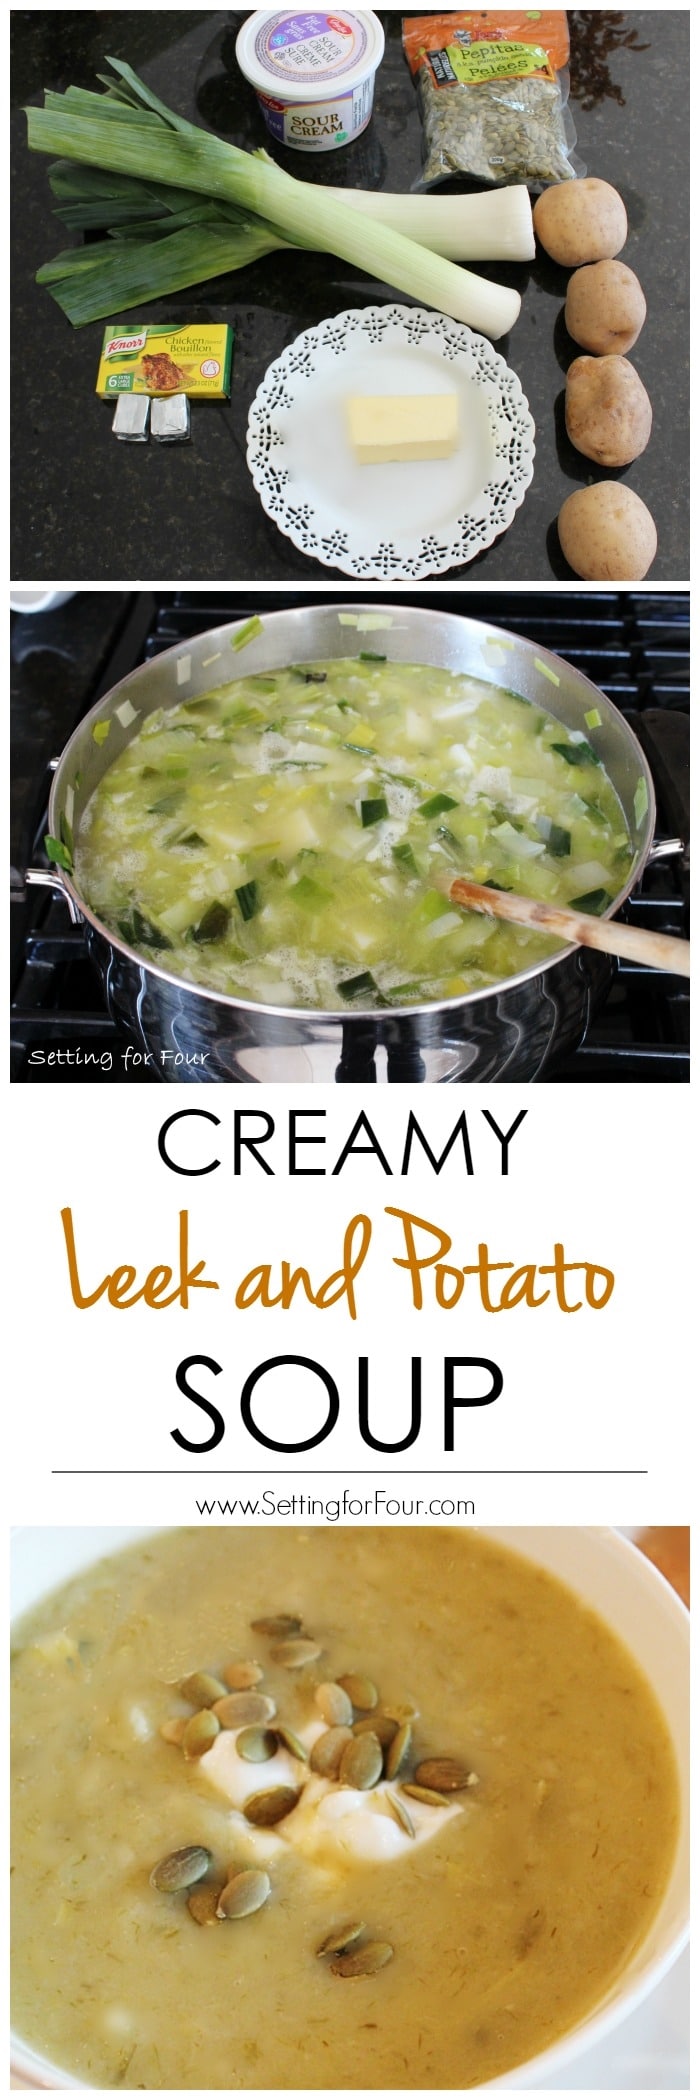 Creamy Leek and Potato Soup Recipe (with pumpkin seed and sour cream topping - yum!) It's the ultimate comfort food for lunch or dinner! So hearty and filling... Your whole family will love it! www.settingforfour.com